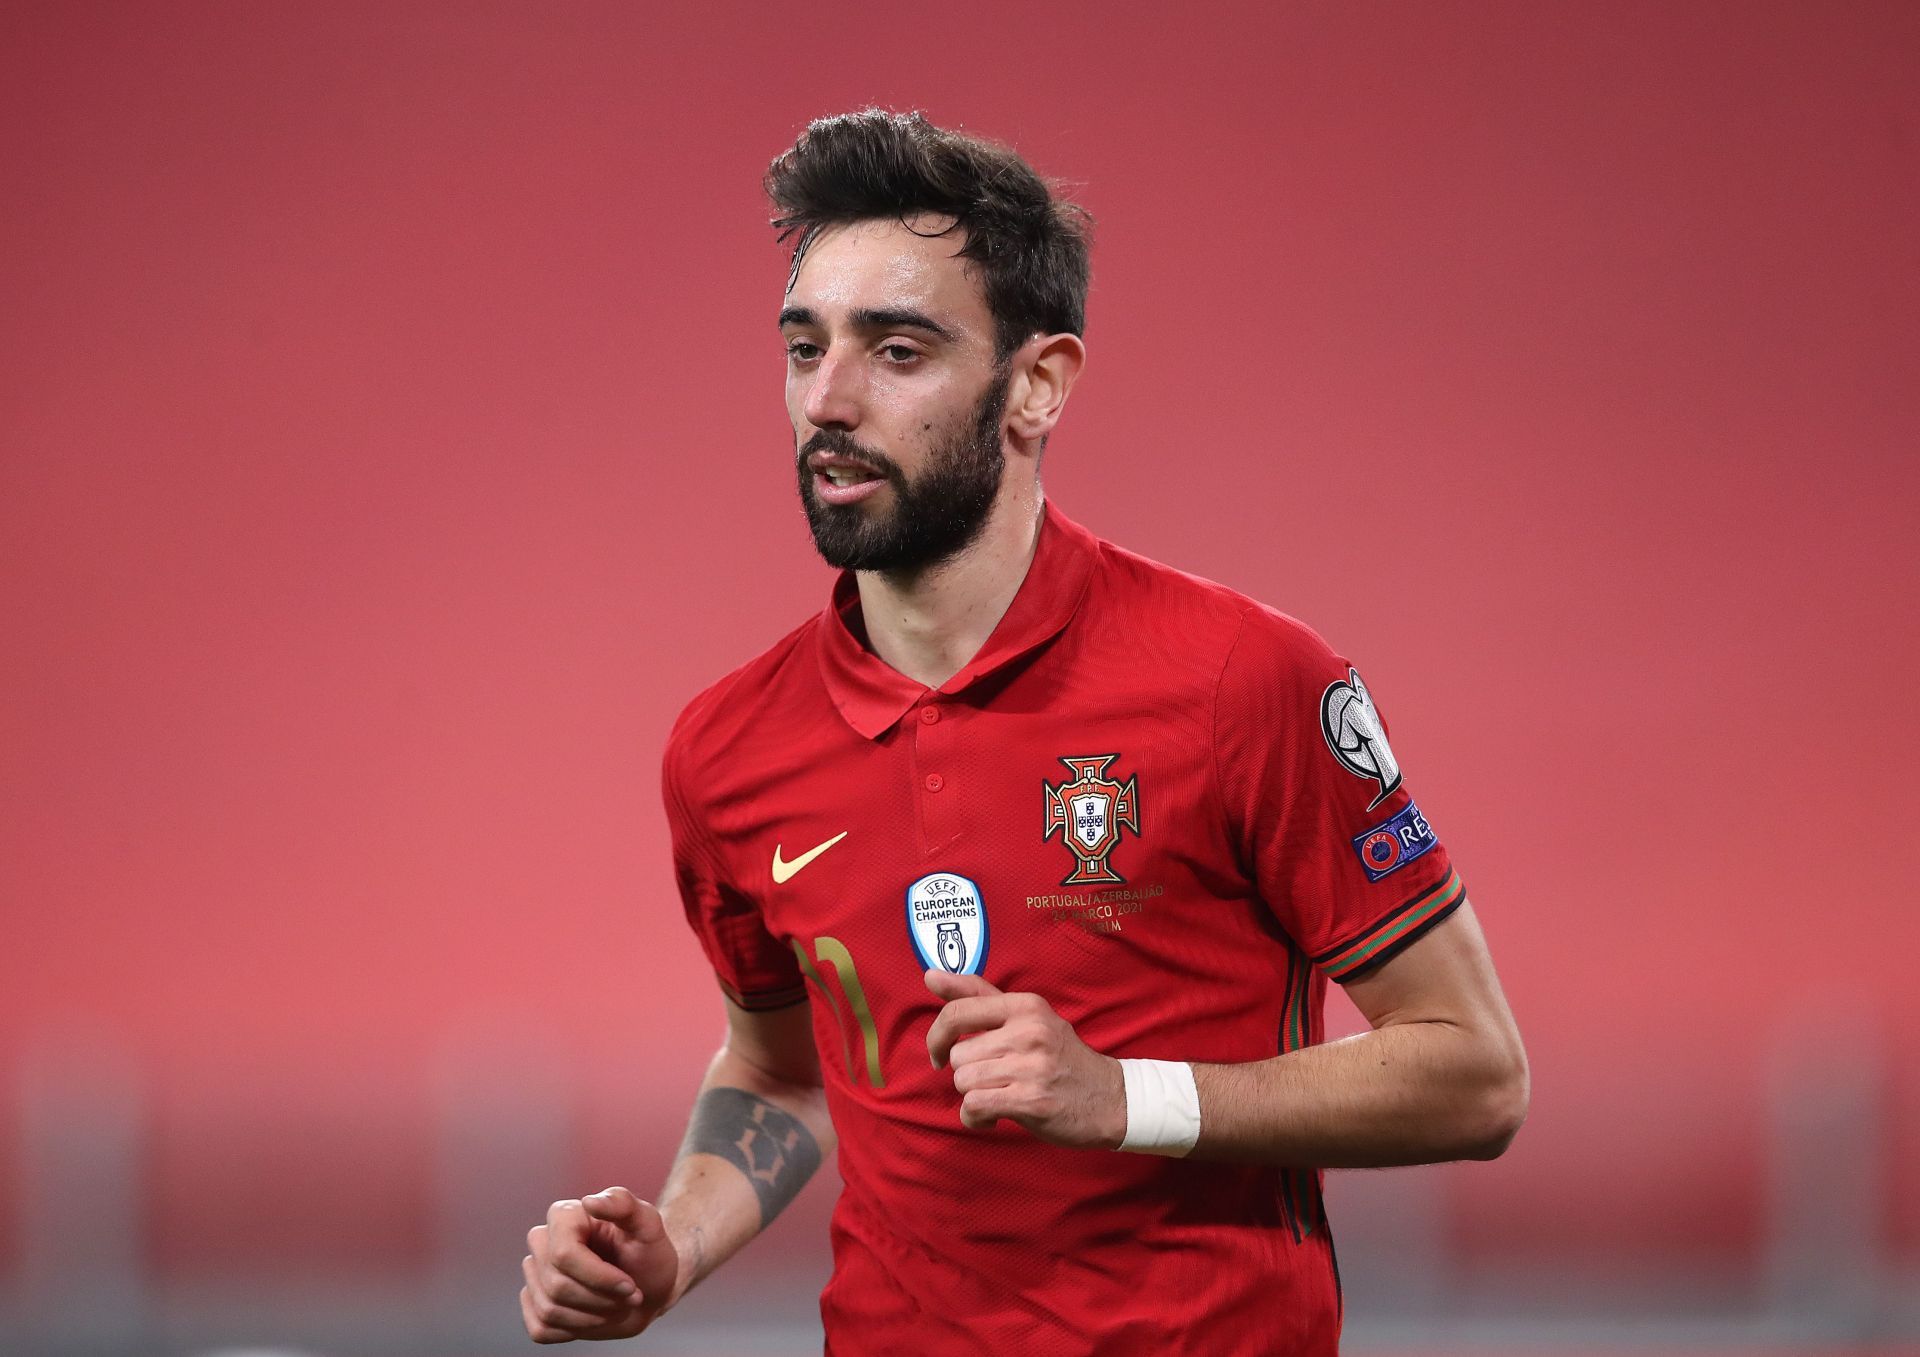 Bruno Fernandes is one of the best midfielders in the world right now.